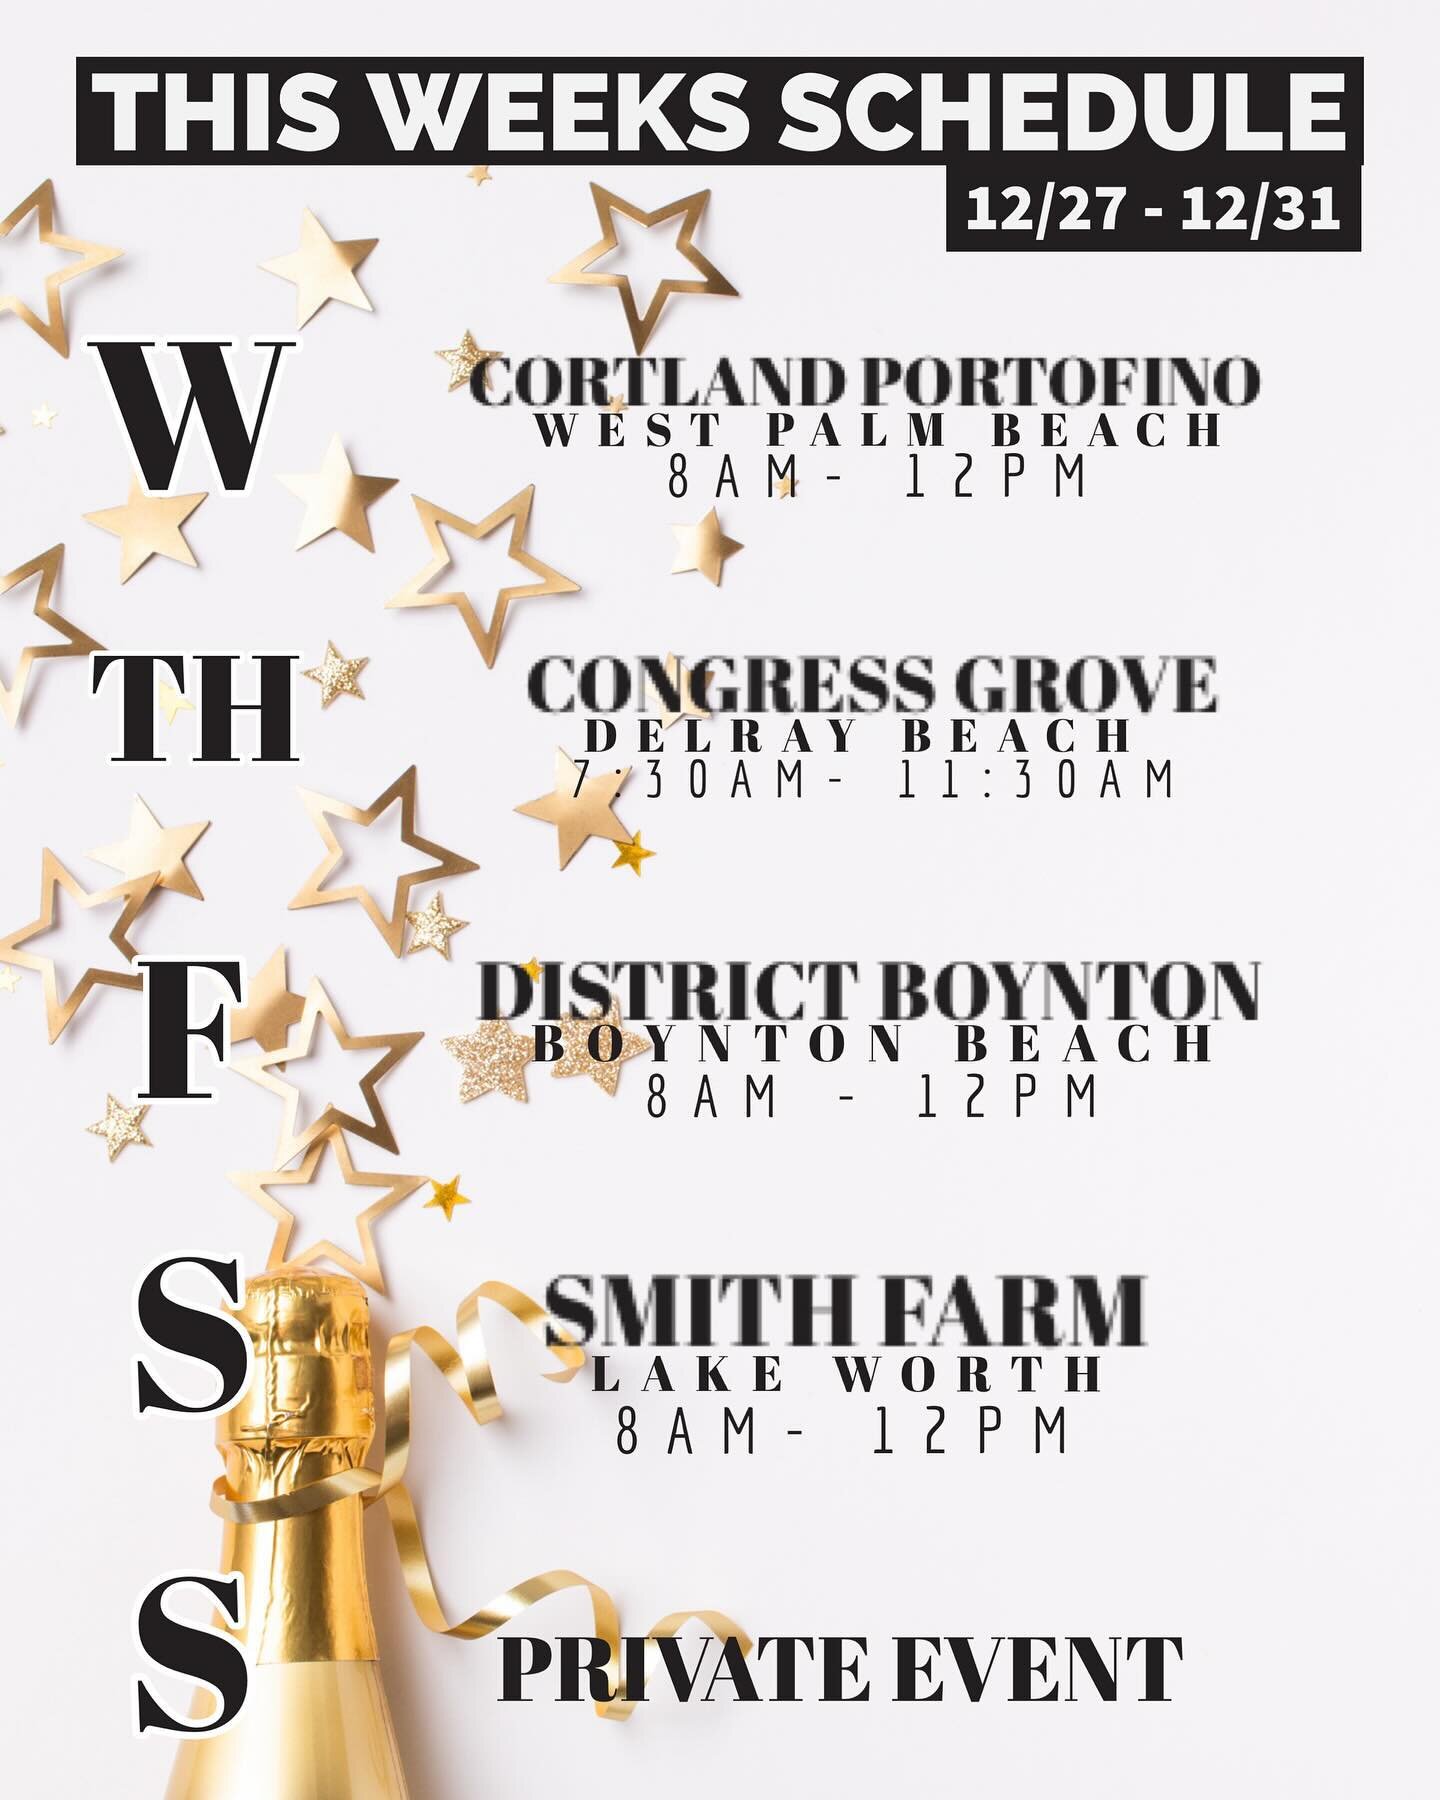 New Years Week! Also this is our last week before we go to the Winter Equestrian Festival at @wellingtoninternational_wef from Jan 3rd- March 31st! Hope to see you all before we are gone!

@cortlandportofinoplace @livecongressgrove @districtboynton @